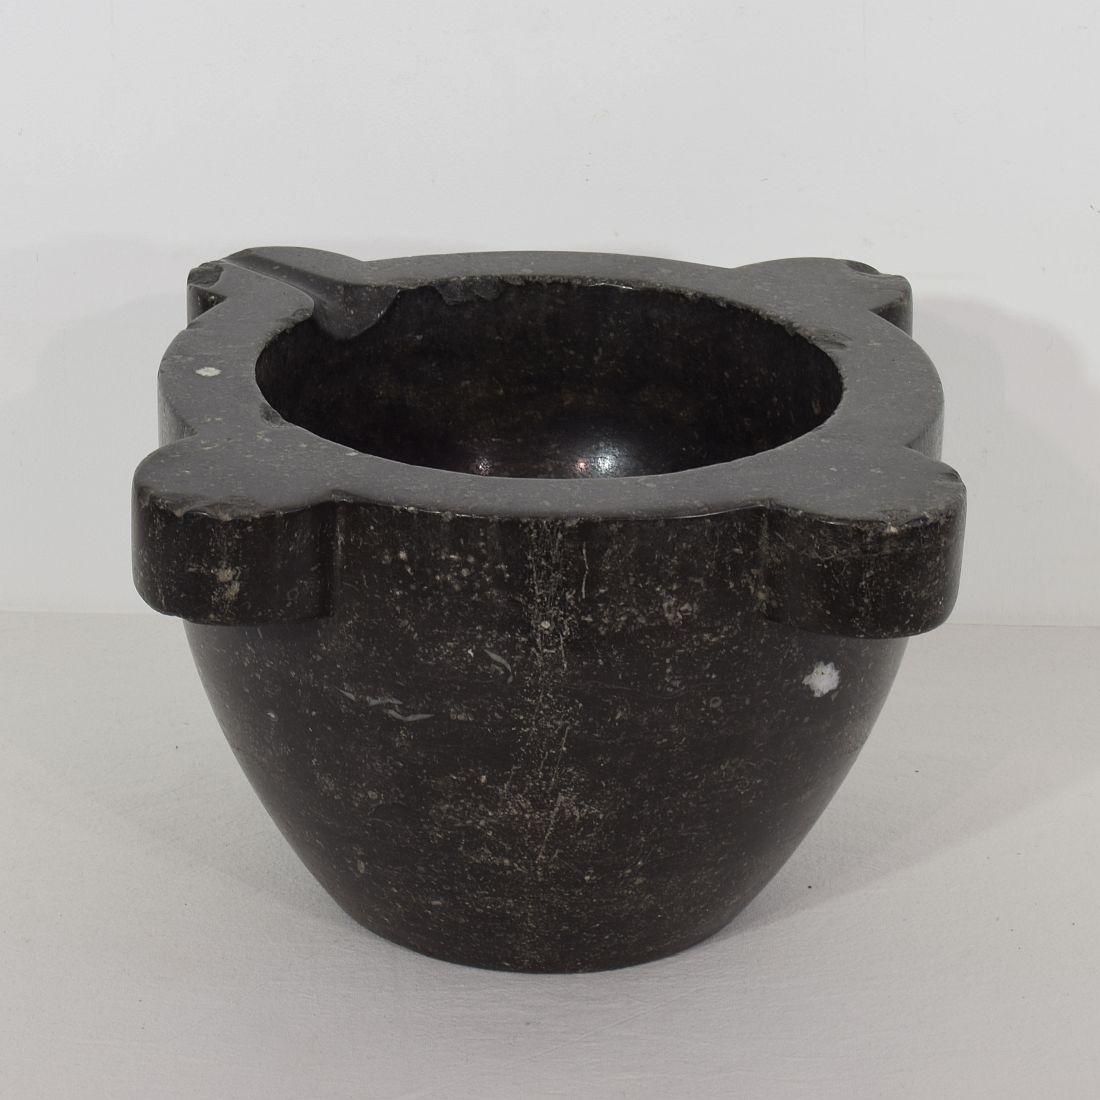 French Provincial French 18th-19th Century Black Marble Mortar